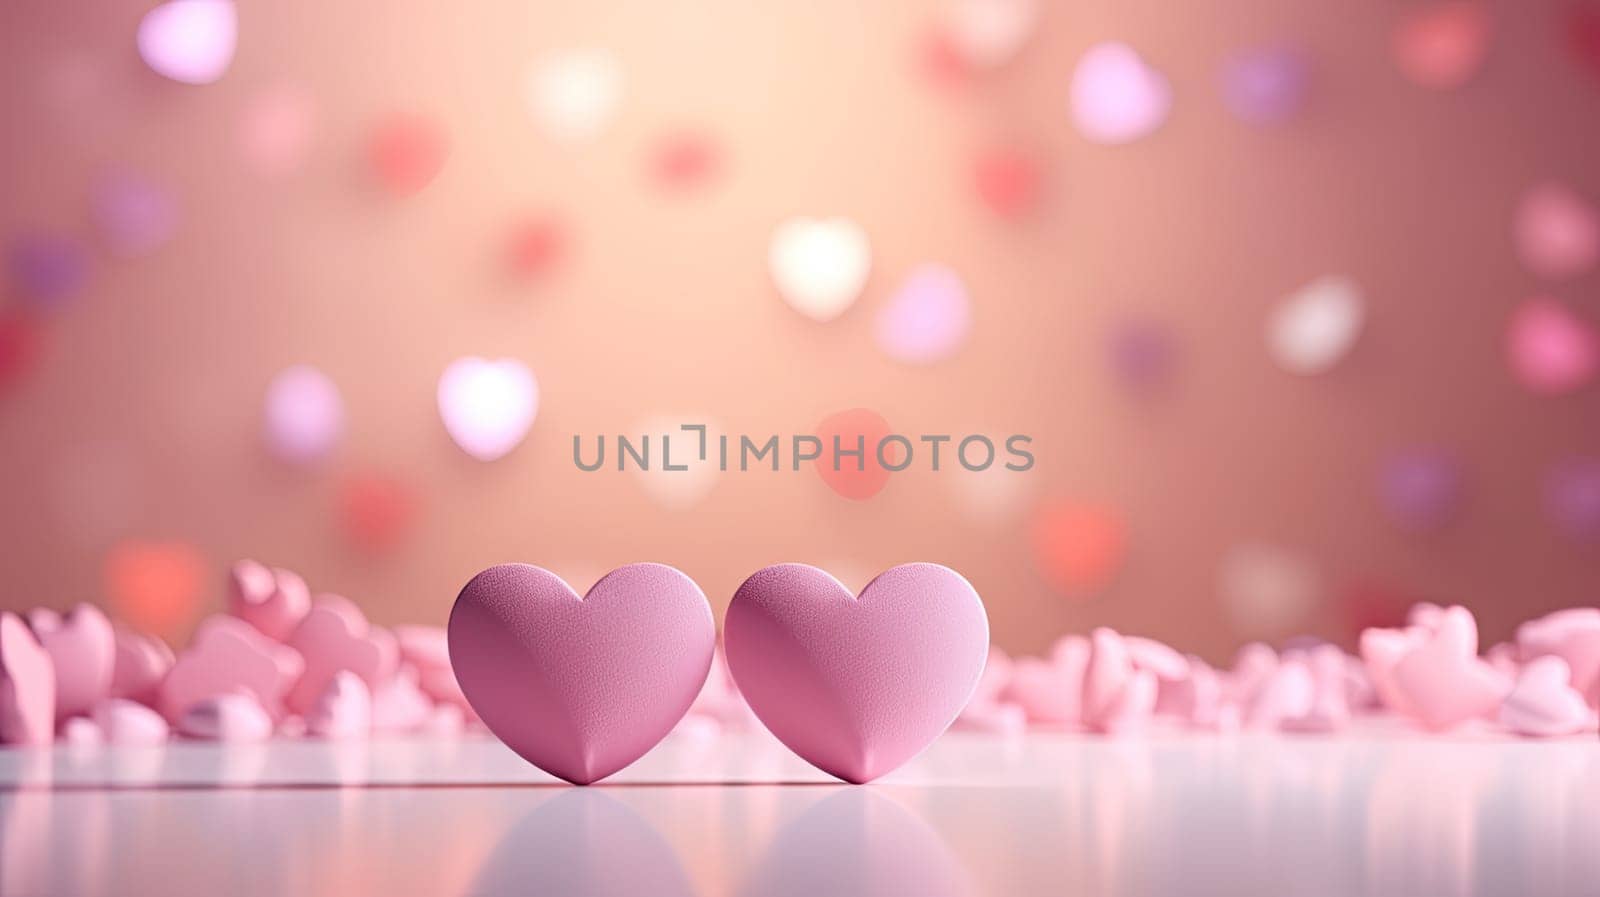 Pink hearts over a white table with blurred background and copy space. Love and san valentine concept by papatonic